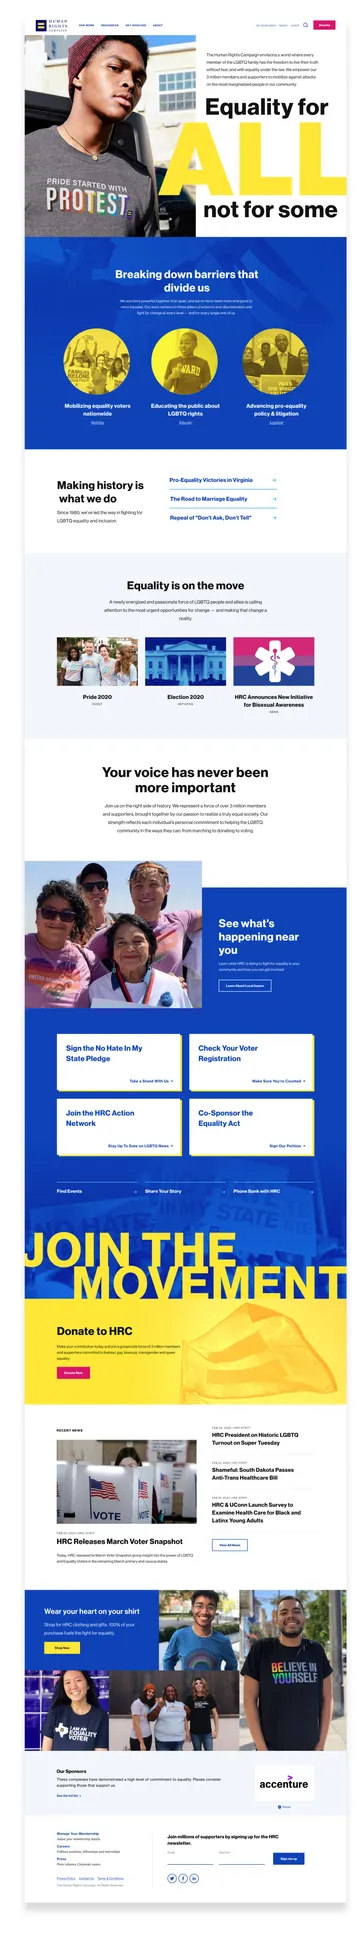 An image of the HRC homepage